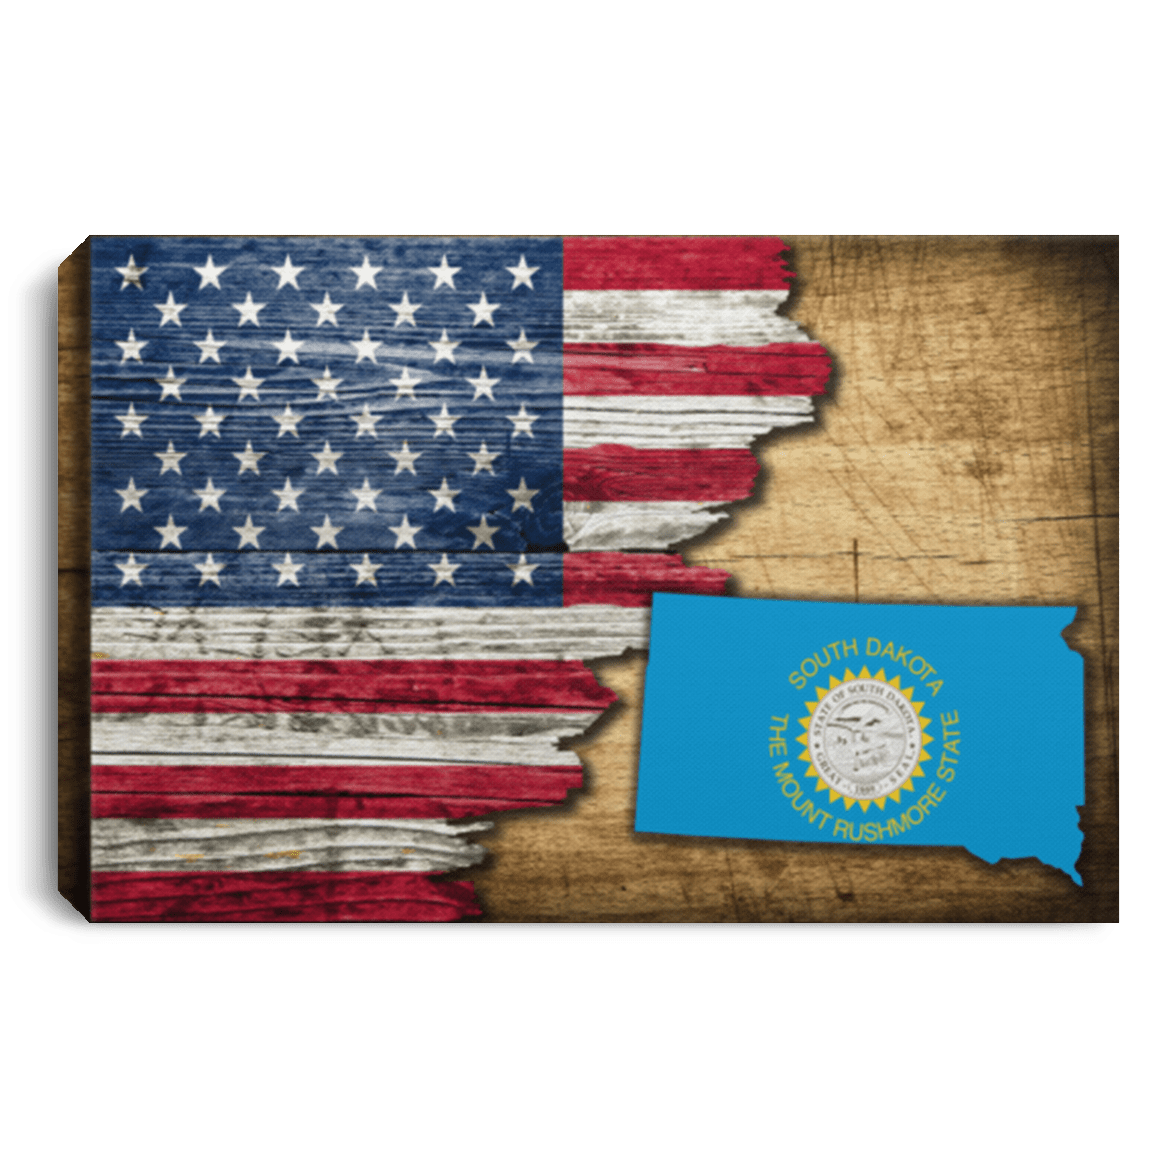 United States/Sourth Dakota Flag Ripped Effect 12X8 Inches Landscape Canvas .75In Frame